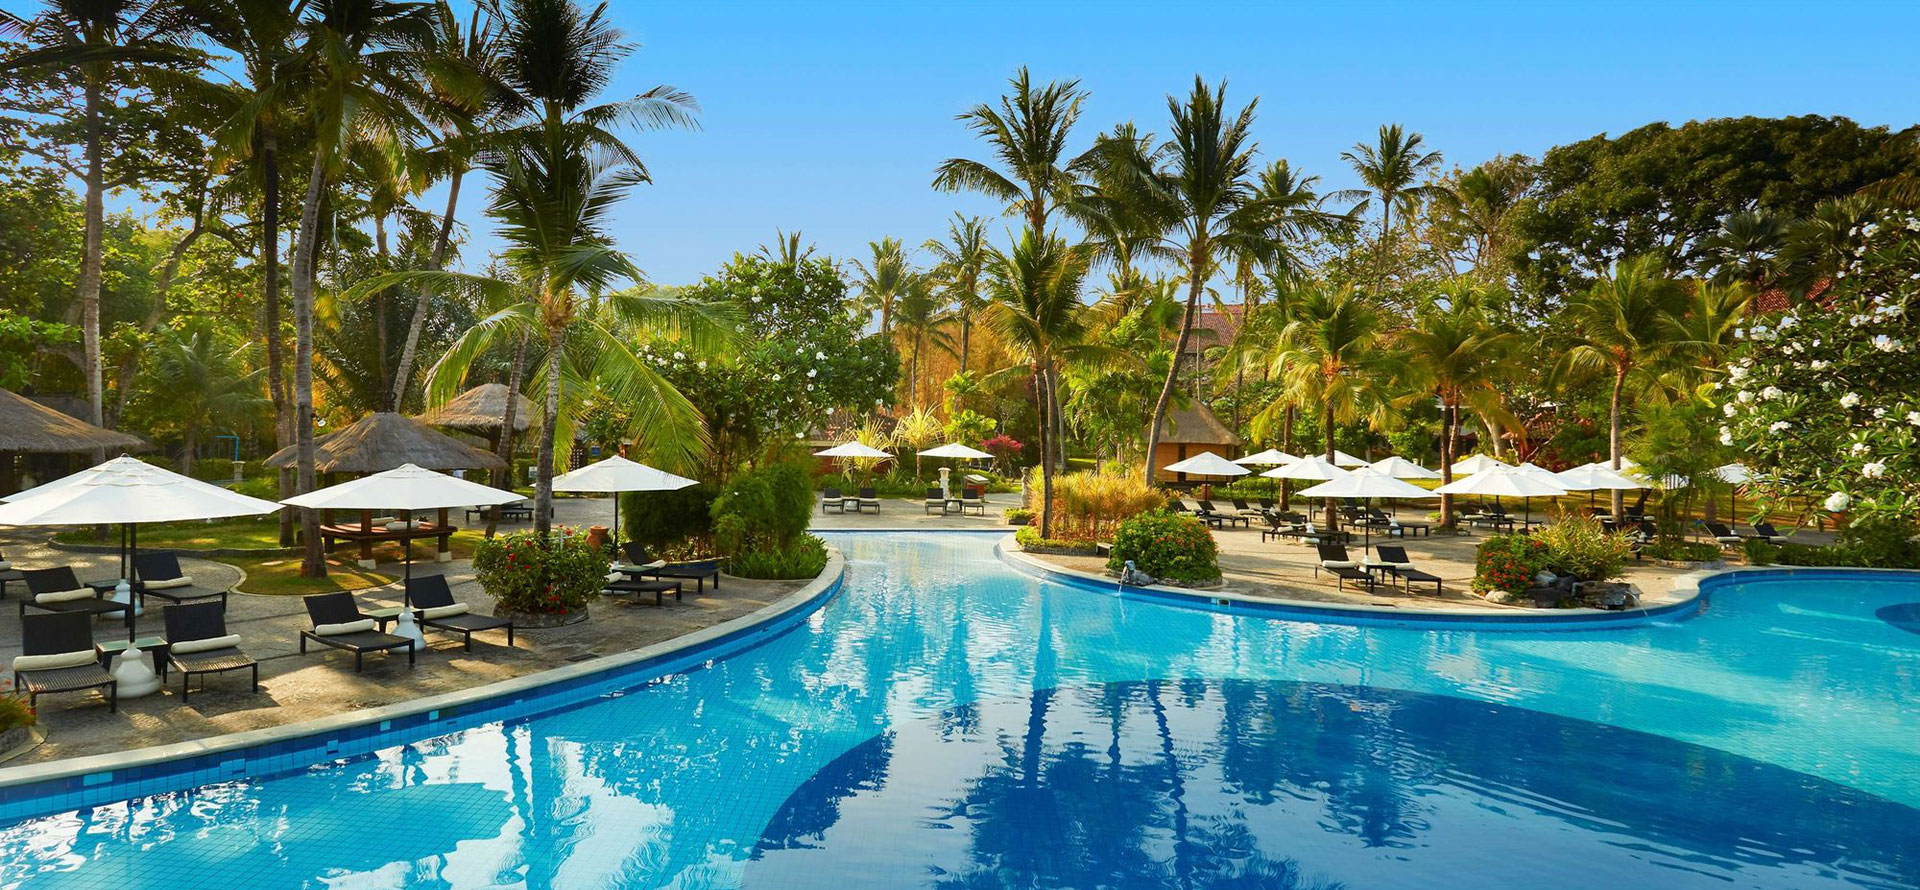 Bali All-Inclusive Resort Adults Only with Swimming Pool.